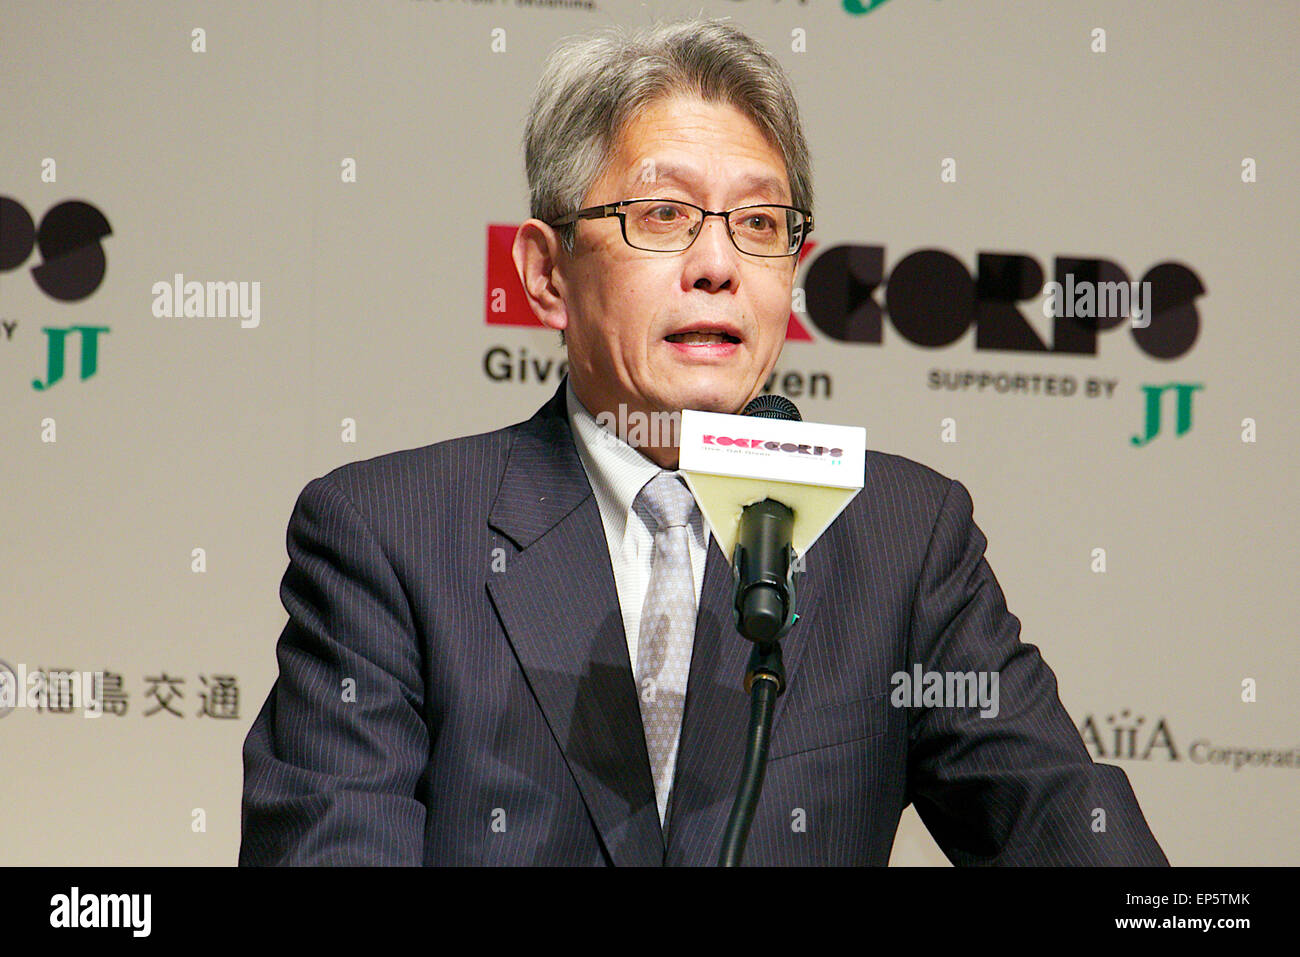 Vice President of Japan Tobacco Inc., Hideki Miyazaki speaks during a press conference of ''RockCorps supported by JT 2015'' on May 13, 2015, Tokyo, Japan. RockCorps, in collaboration with collaboration Fukushima Prefecture and other companies such as Yahoo! Japan, will organise volunteers to help rebuild the communities badly affected by the Great East Japan Earthquake of 2011. For the second year in Japan organizers expect more than 4,000 volunteers who will each give four hours of their time working on ''agriculture support, environmental regeneration and life support'' projects (from May Stock Photo